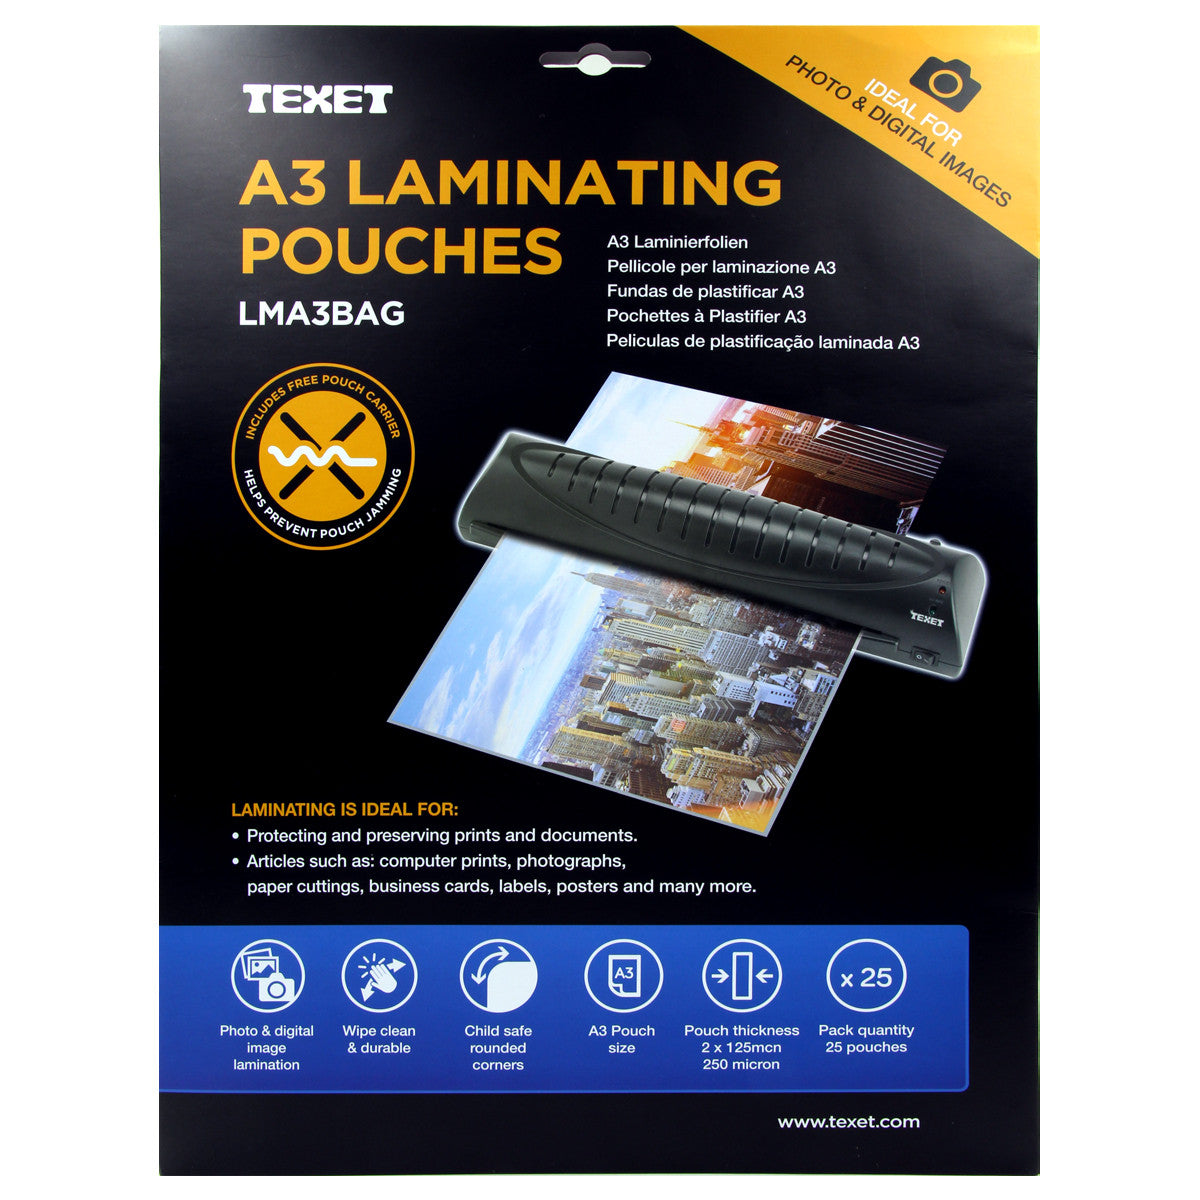 TEXET A3 High Quality laminating pouches - Pack of 25 Pouches